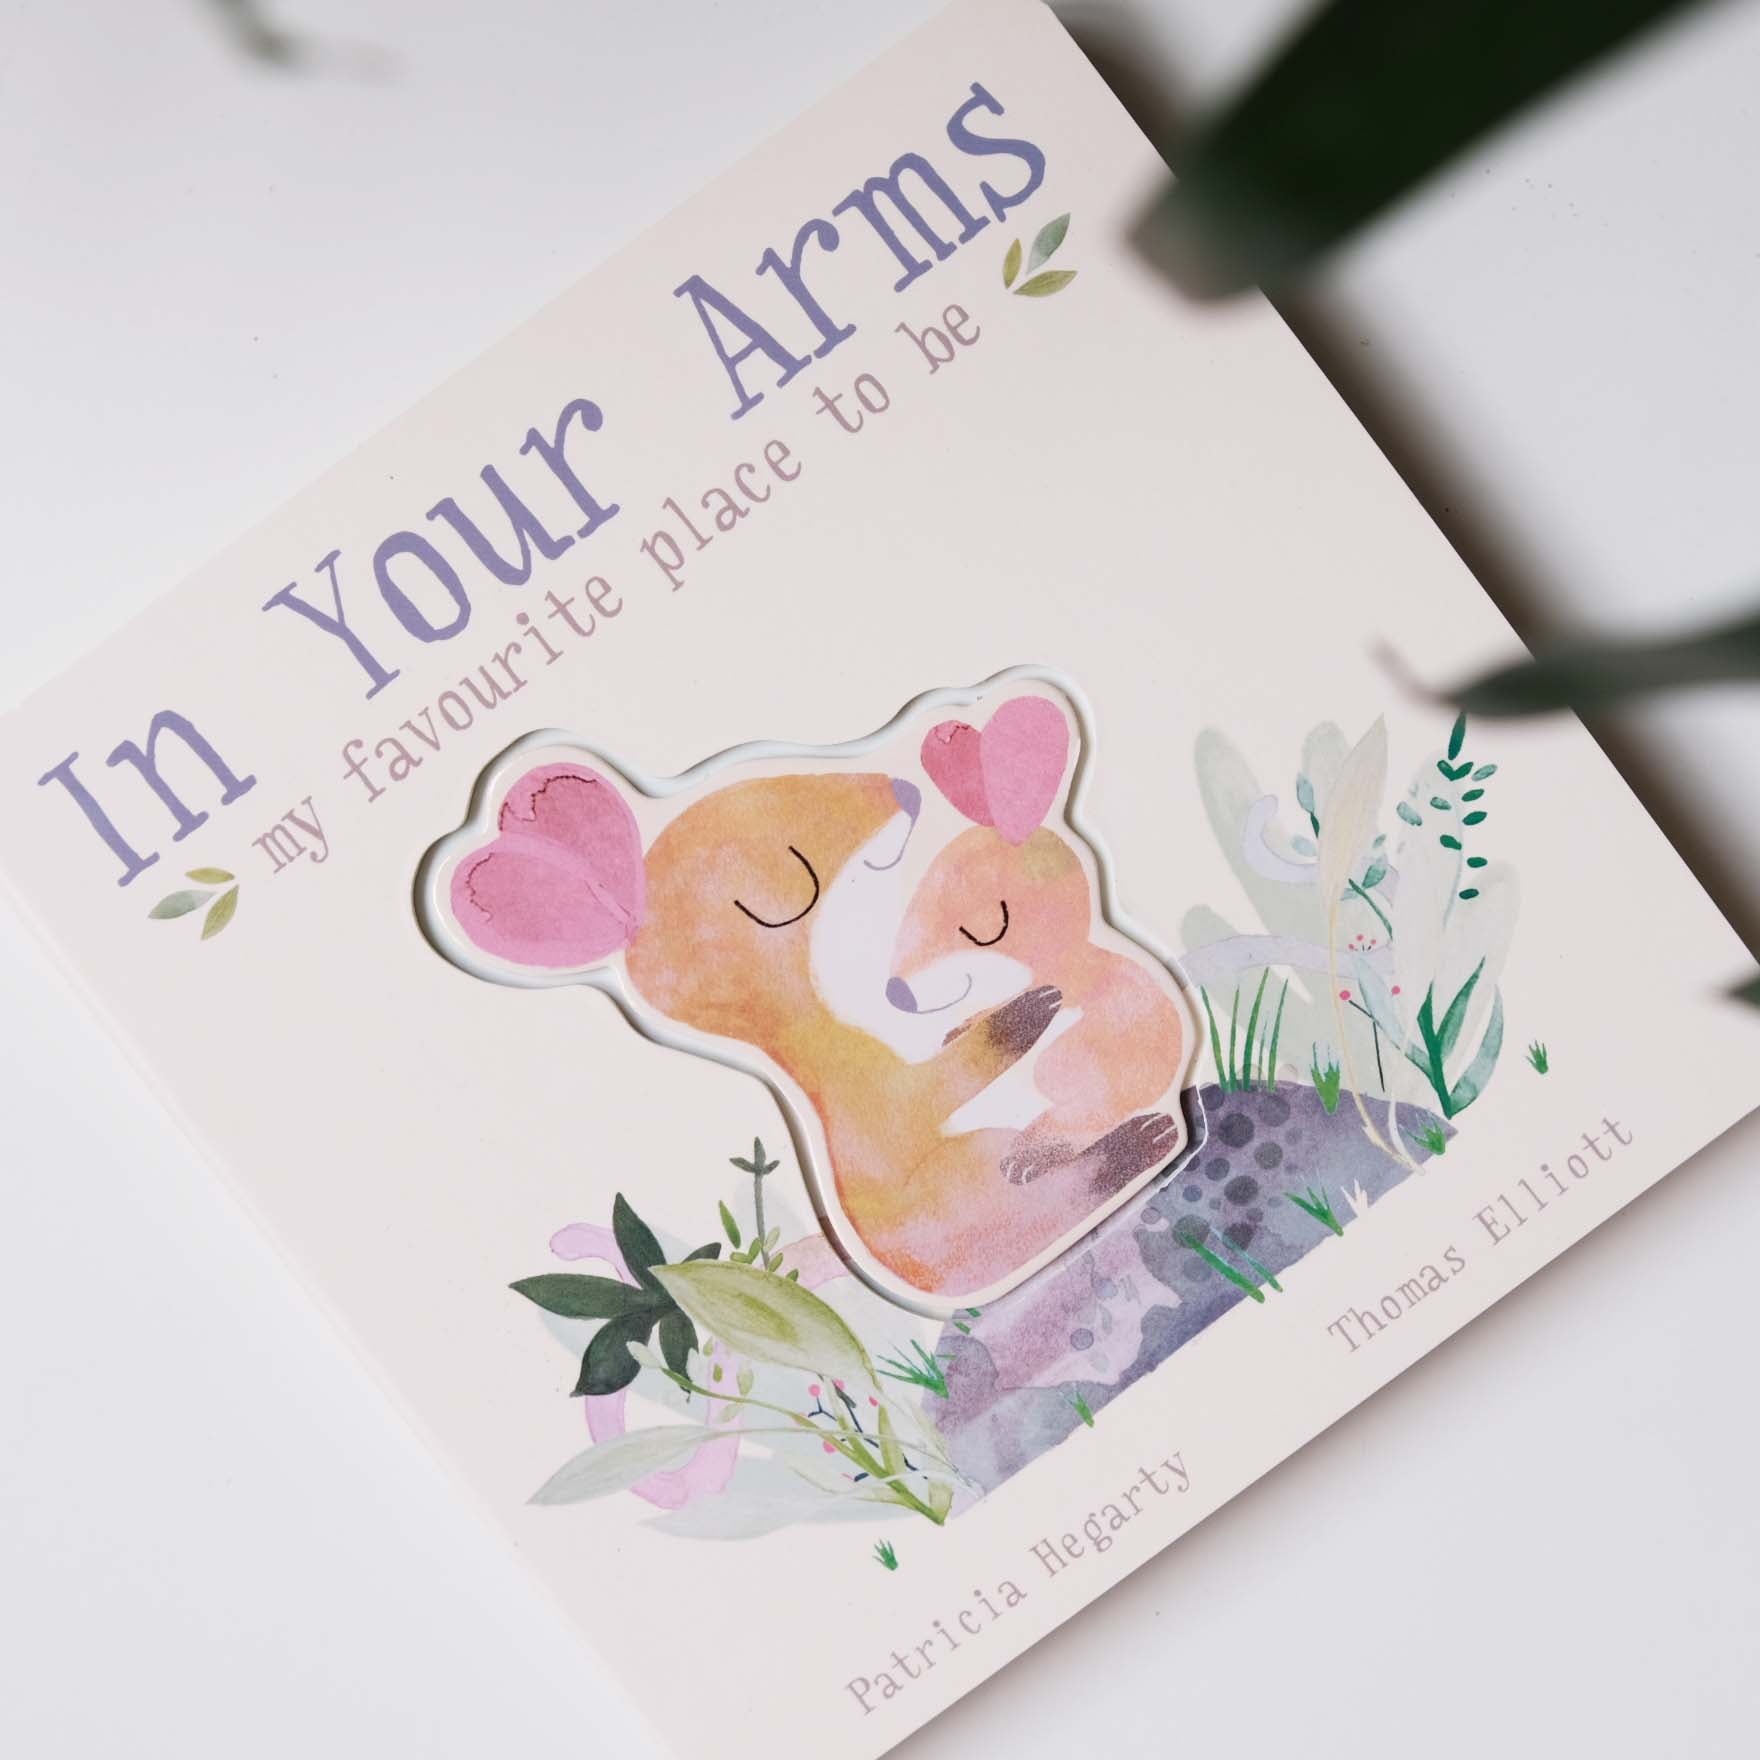 In Your Arms (Novelty Book)